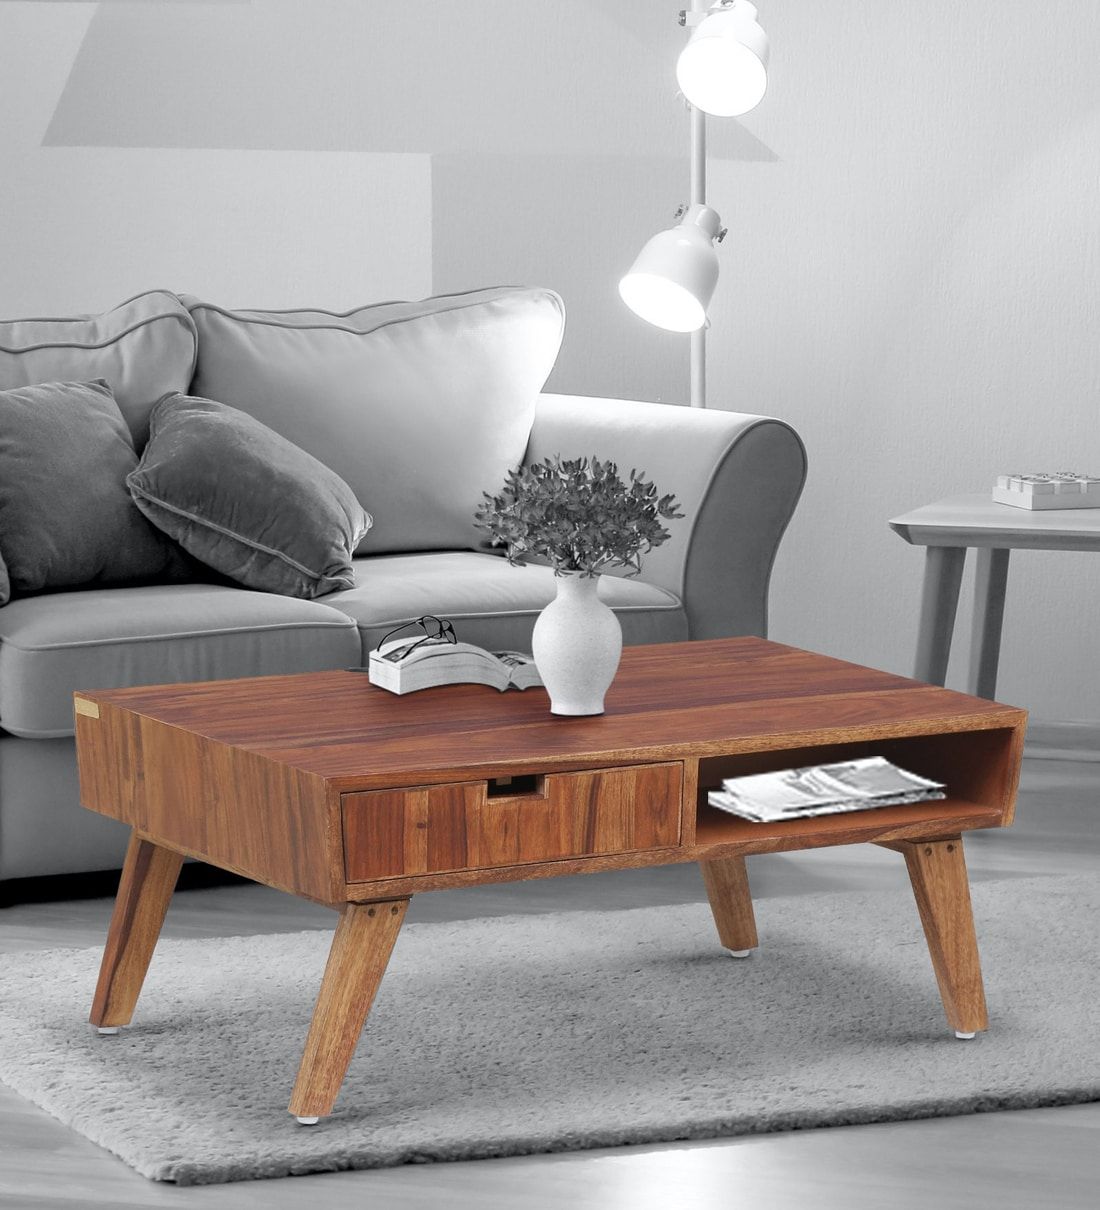 Buy Paloma Sheesham Wood Coffee Table In Rustic Teak Finish Intended For Wooden Mid Century Coffee Tables (Gallery 7 of 20)